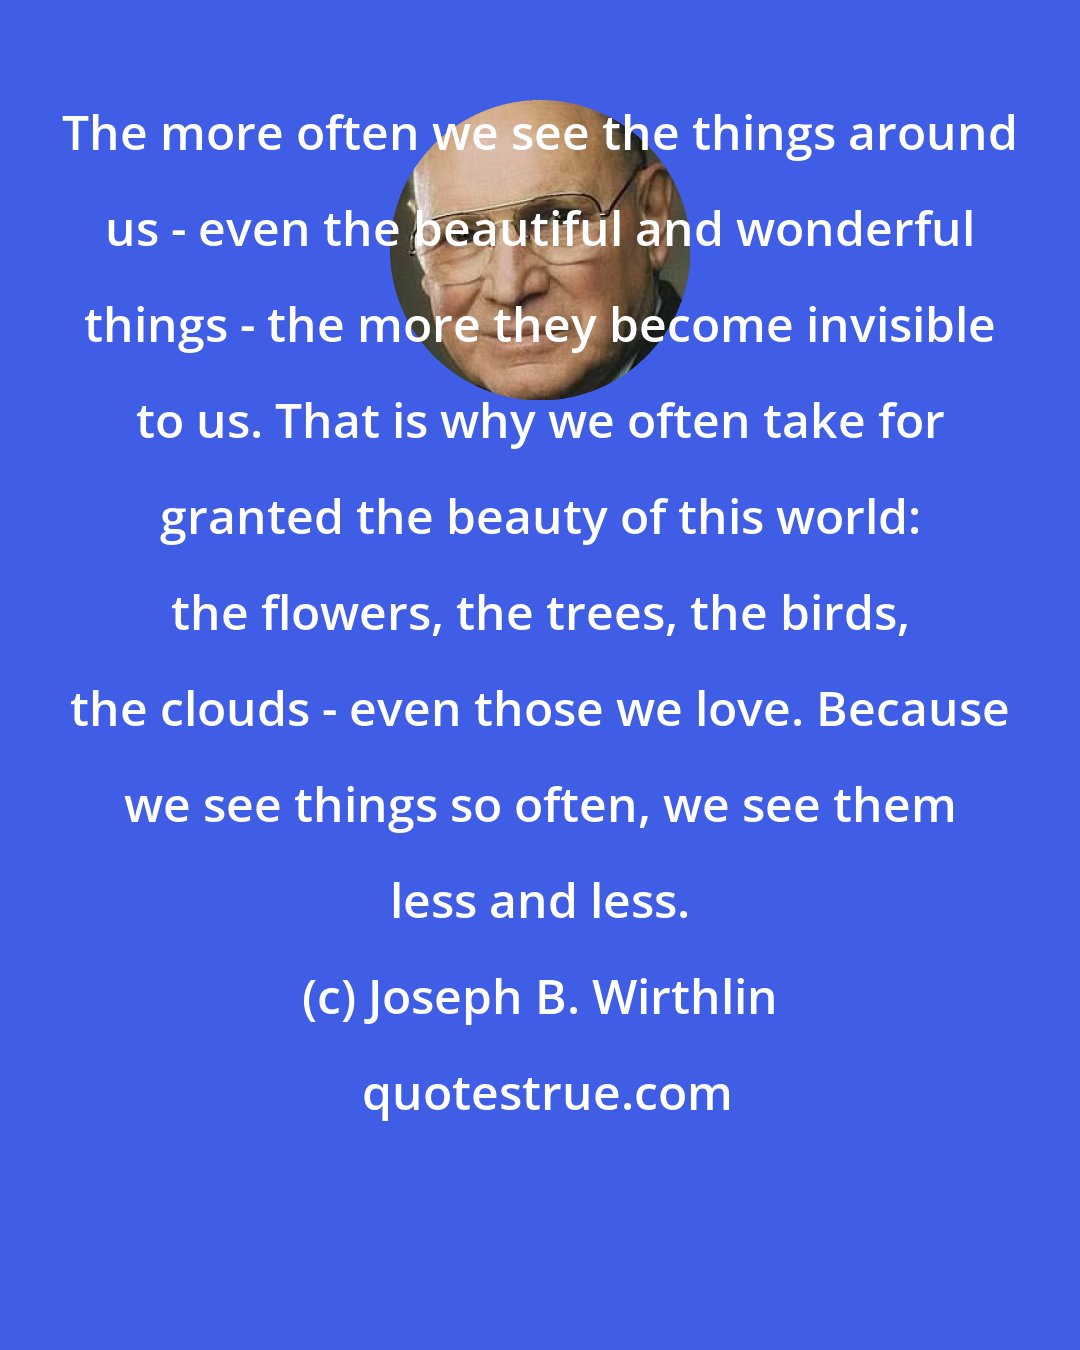 Joseph B. Wirthlin: The more often we see the things around us - even the beautiful and wonderful things - the more they become invisible to us. That is why we often take for granted the beauty of this world: the flowers, the trees, the birds, the clouds - even those we love. Because we see things so often, we see them less and less.